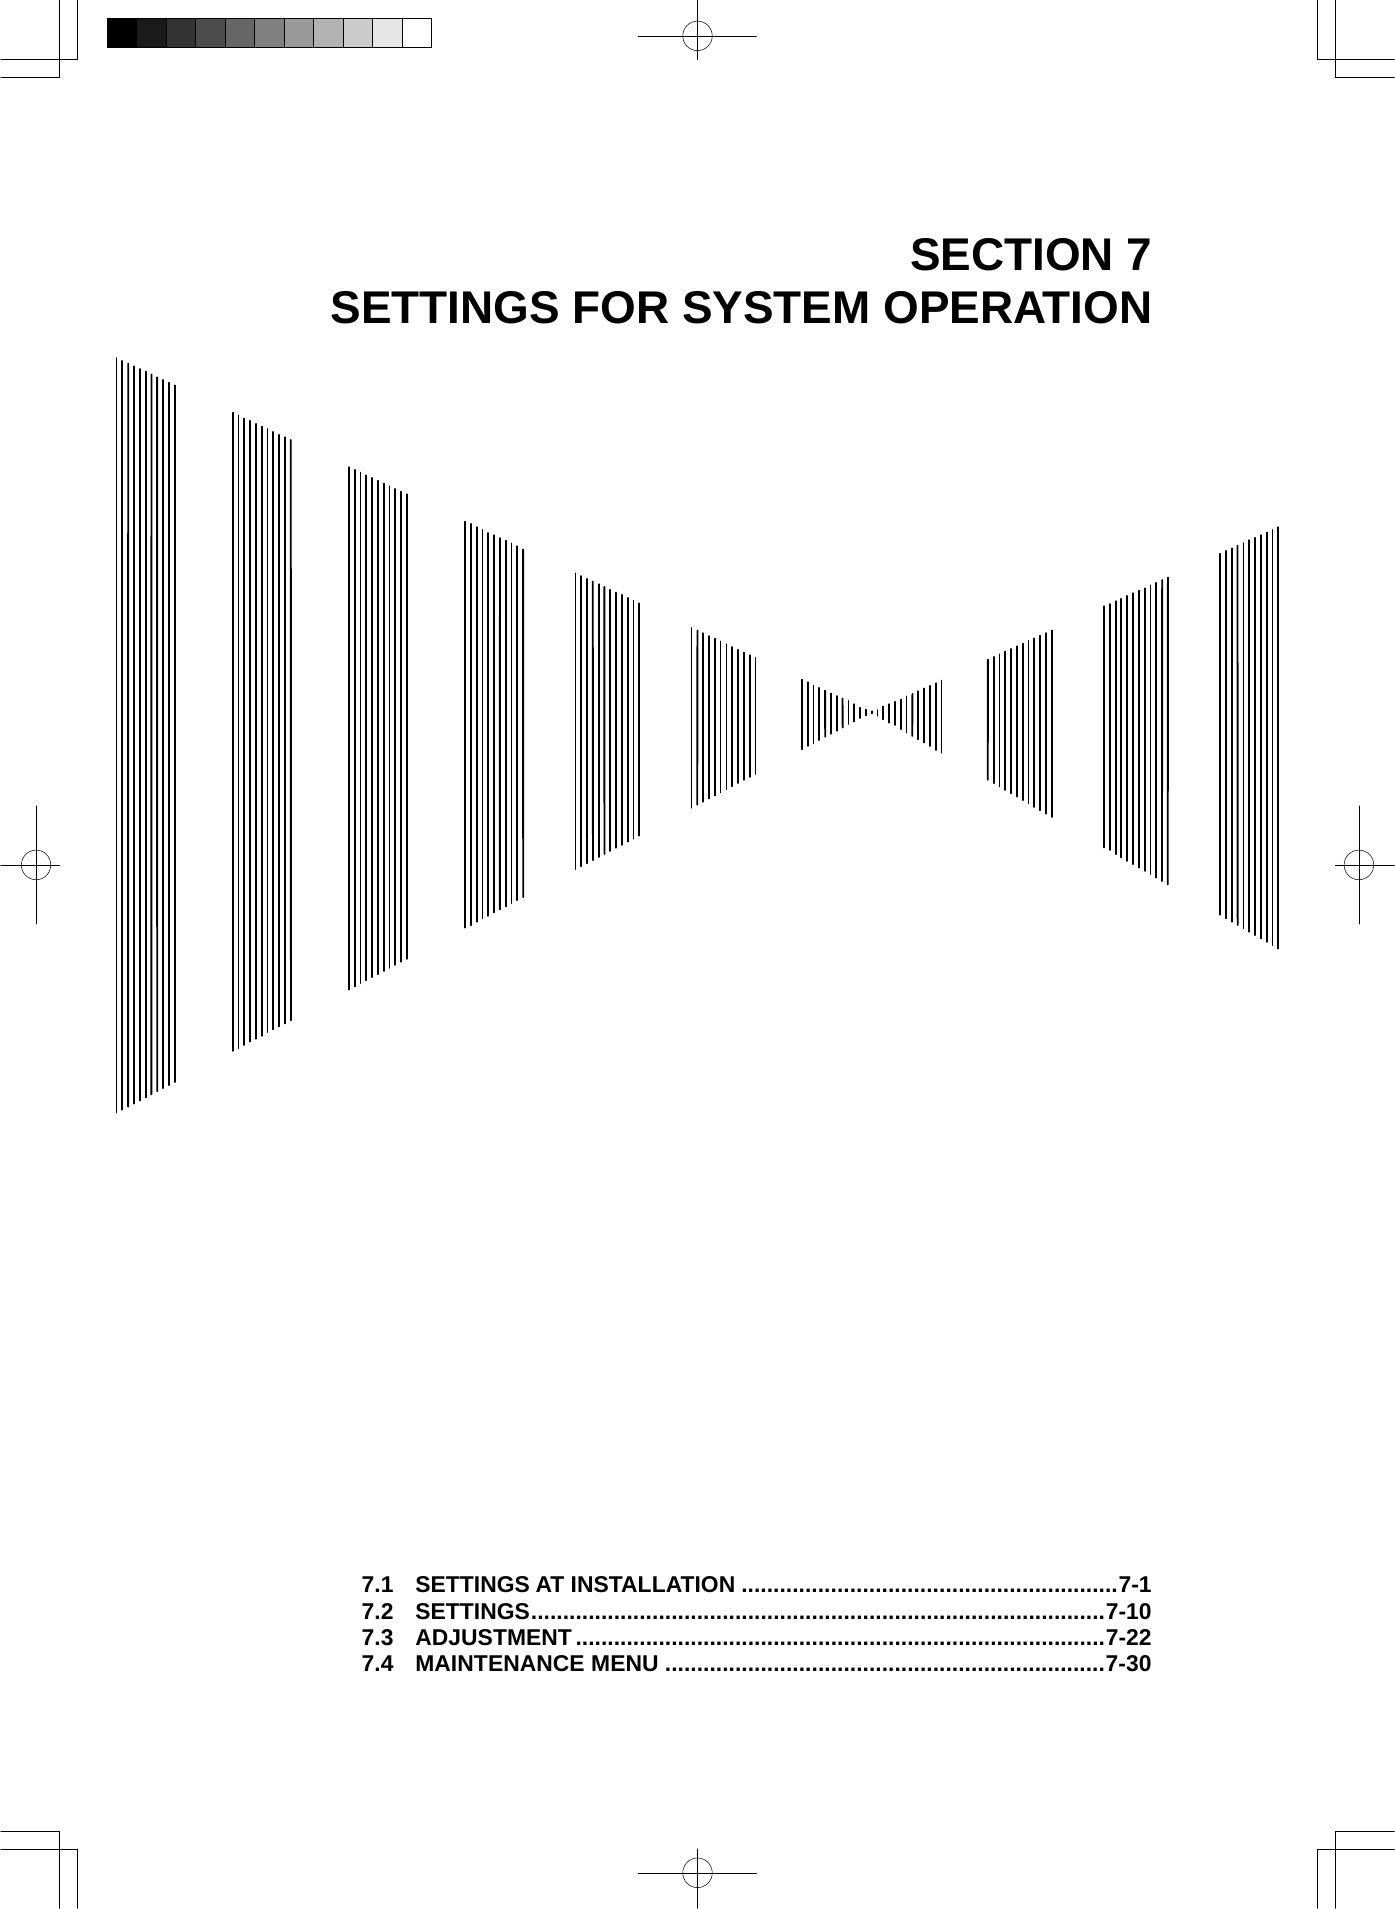   SECTION 7 SETTINGS FOR SYSTEM OPERATION                                              7.1 SETTINGS AT INSTALLATION ...........................................................7-1 7.2 SETTINGS..........................................................................................7-10 7.3 ADJUSTMENT...................................................................................7-22 7.4 MAINTENANCE MENU .....................................................................7-30 